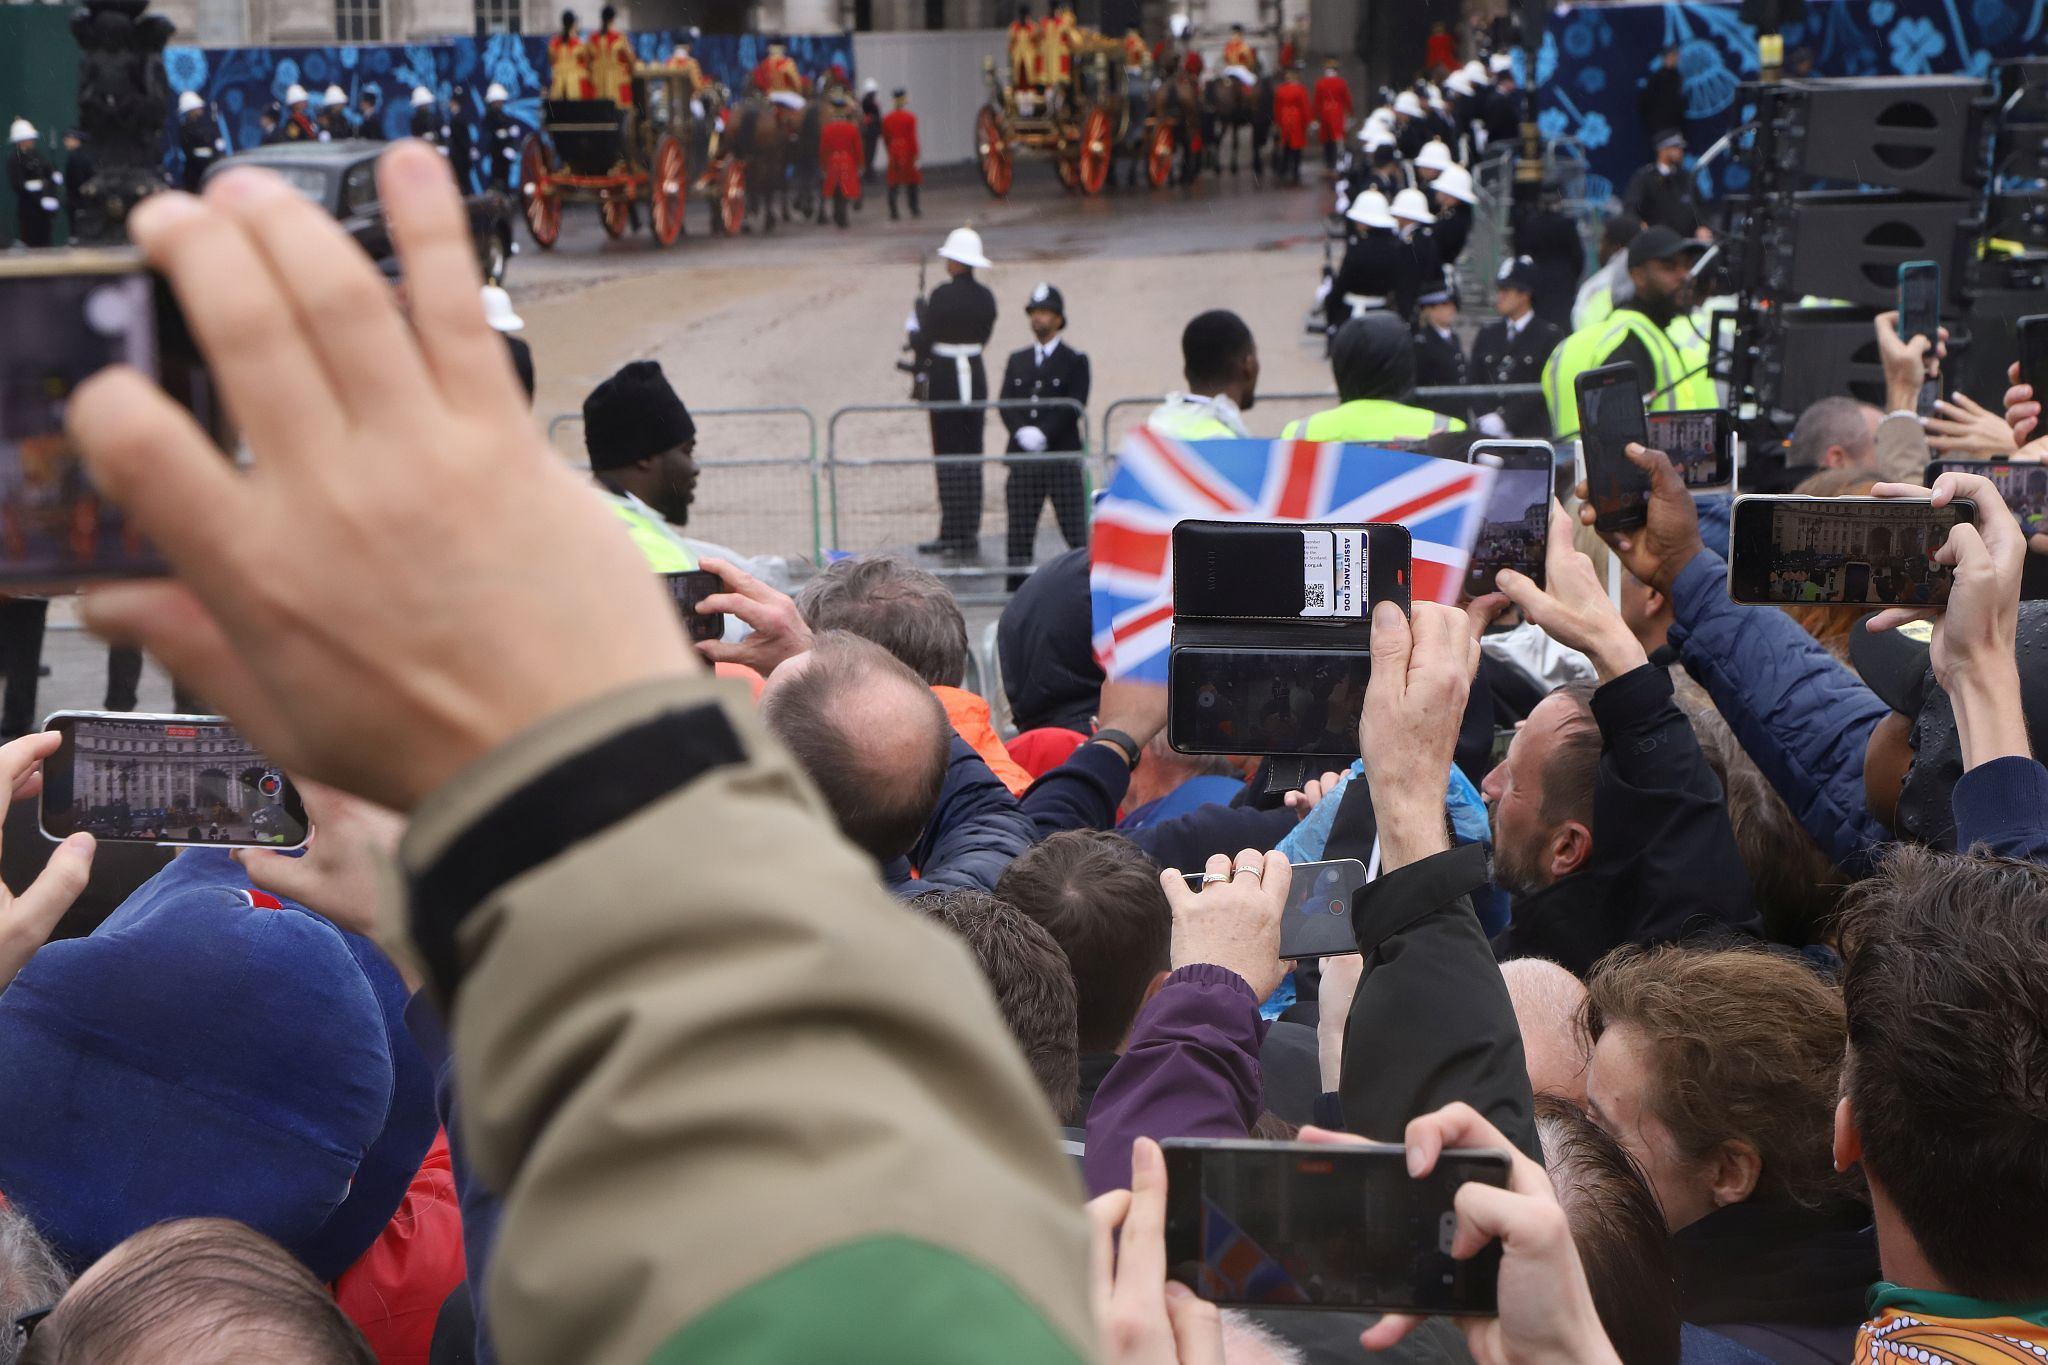 Defying the forecast rain, large numbers ensured their were crowds of spectators along the route of the procession. As the parade passed a forest of selfie sticks were held up high to record the event. 06-May-2023.